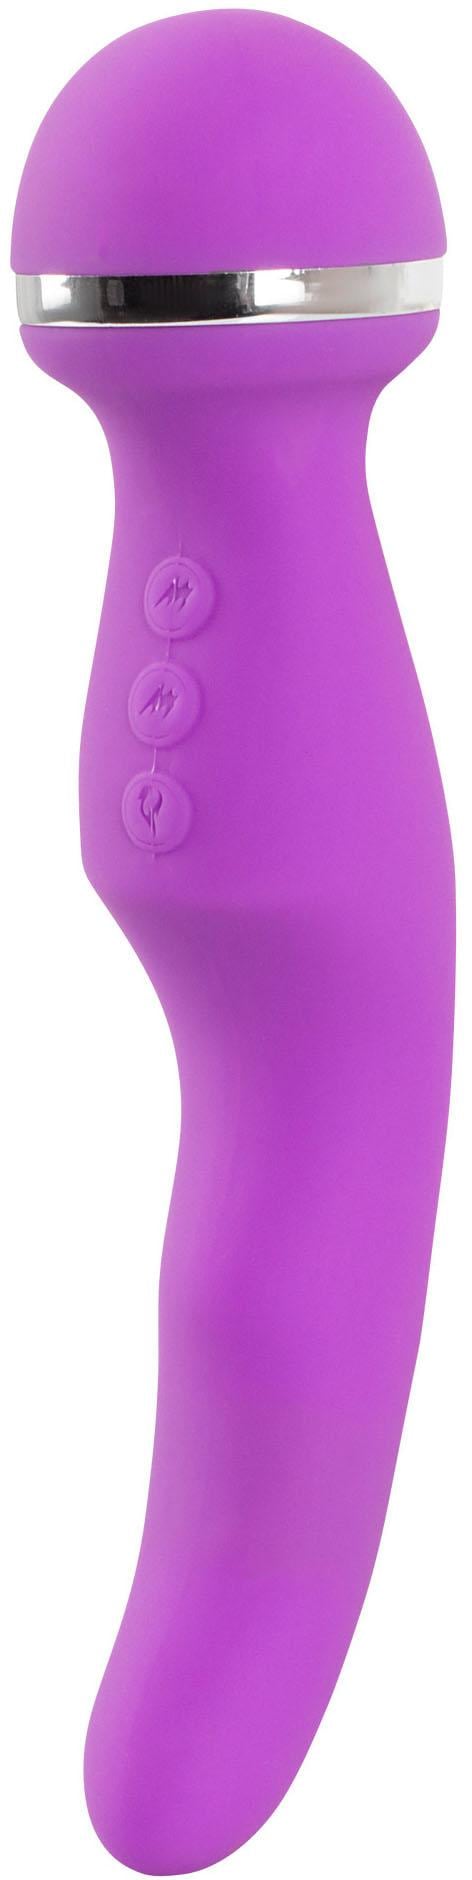 Wand Massager »Rechargeable Warming Vibe«, 2-in-1